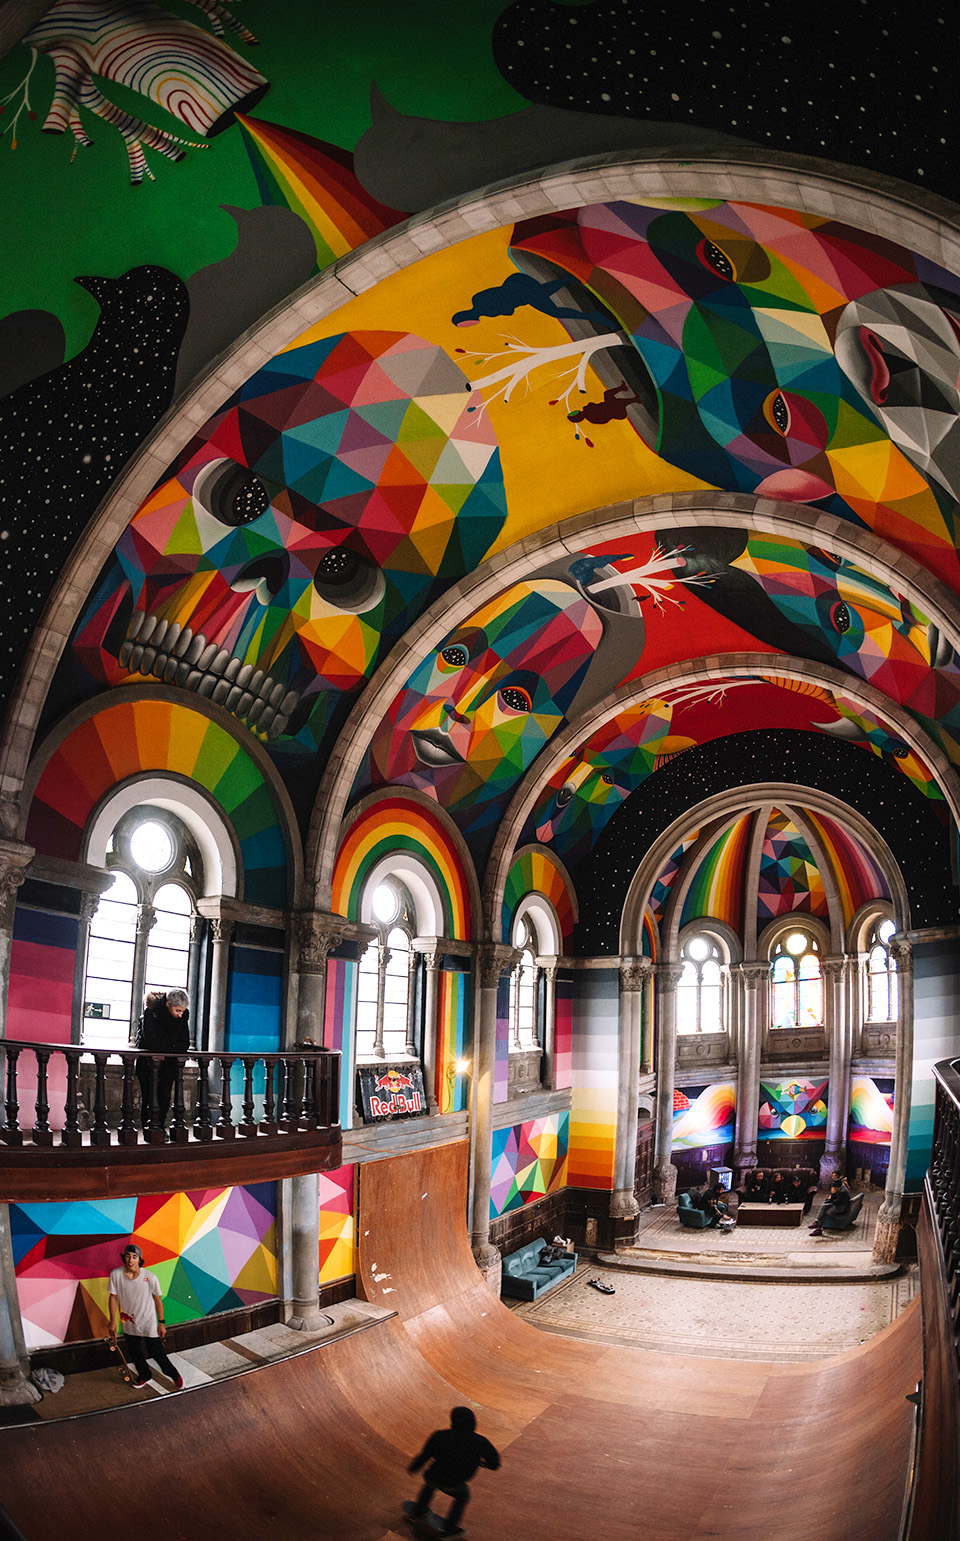 Skate ramp in former church and colourful murals